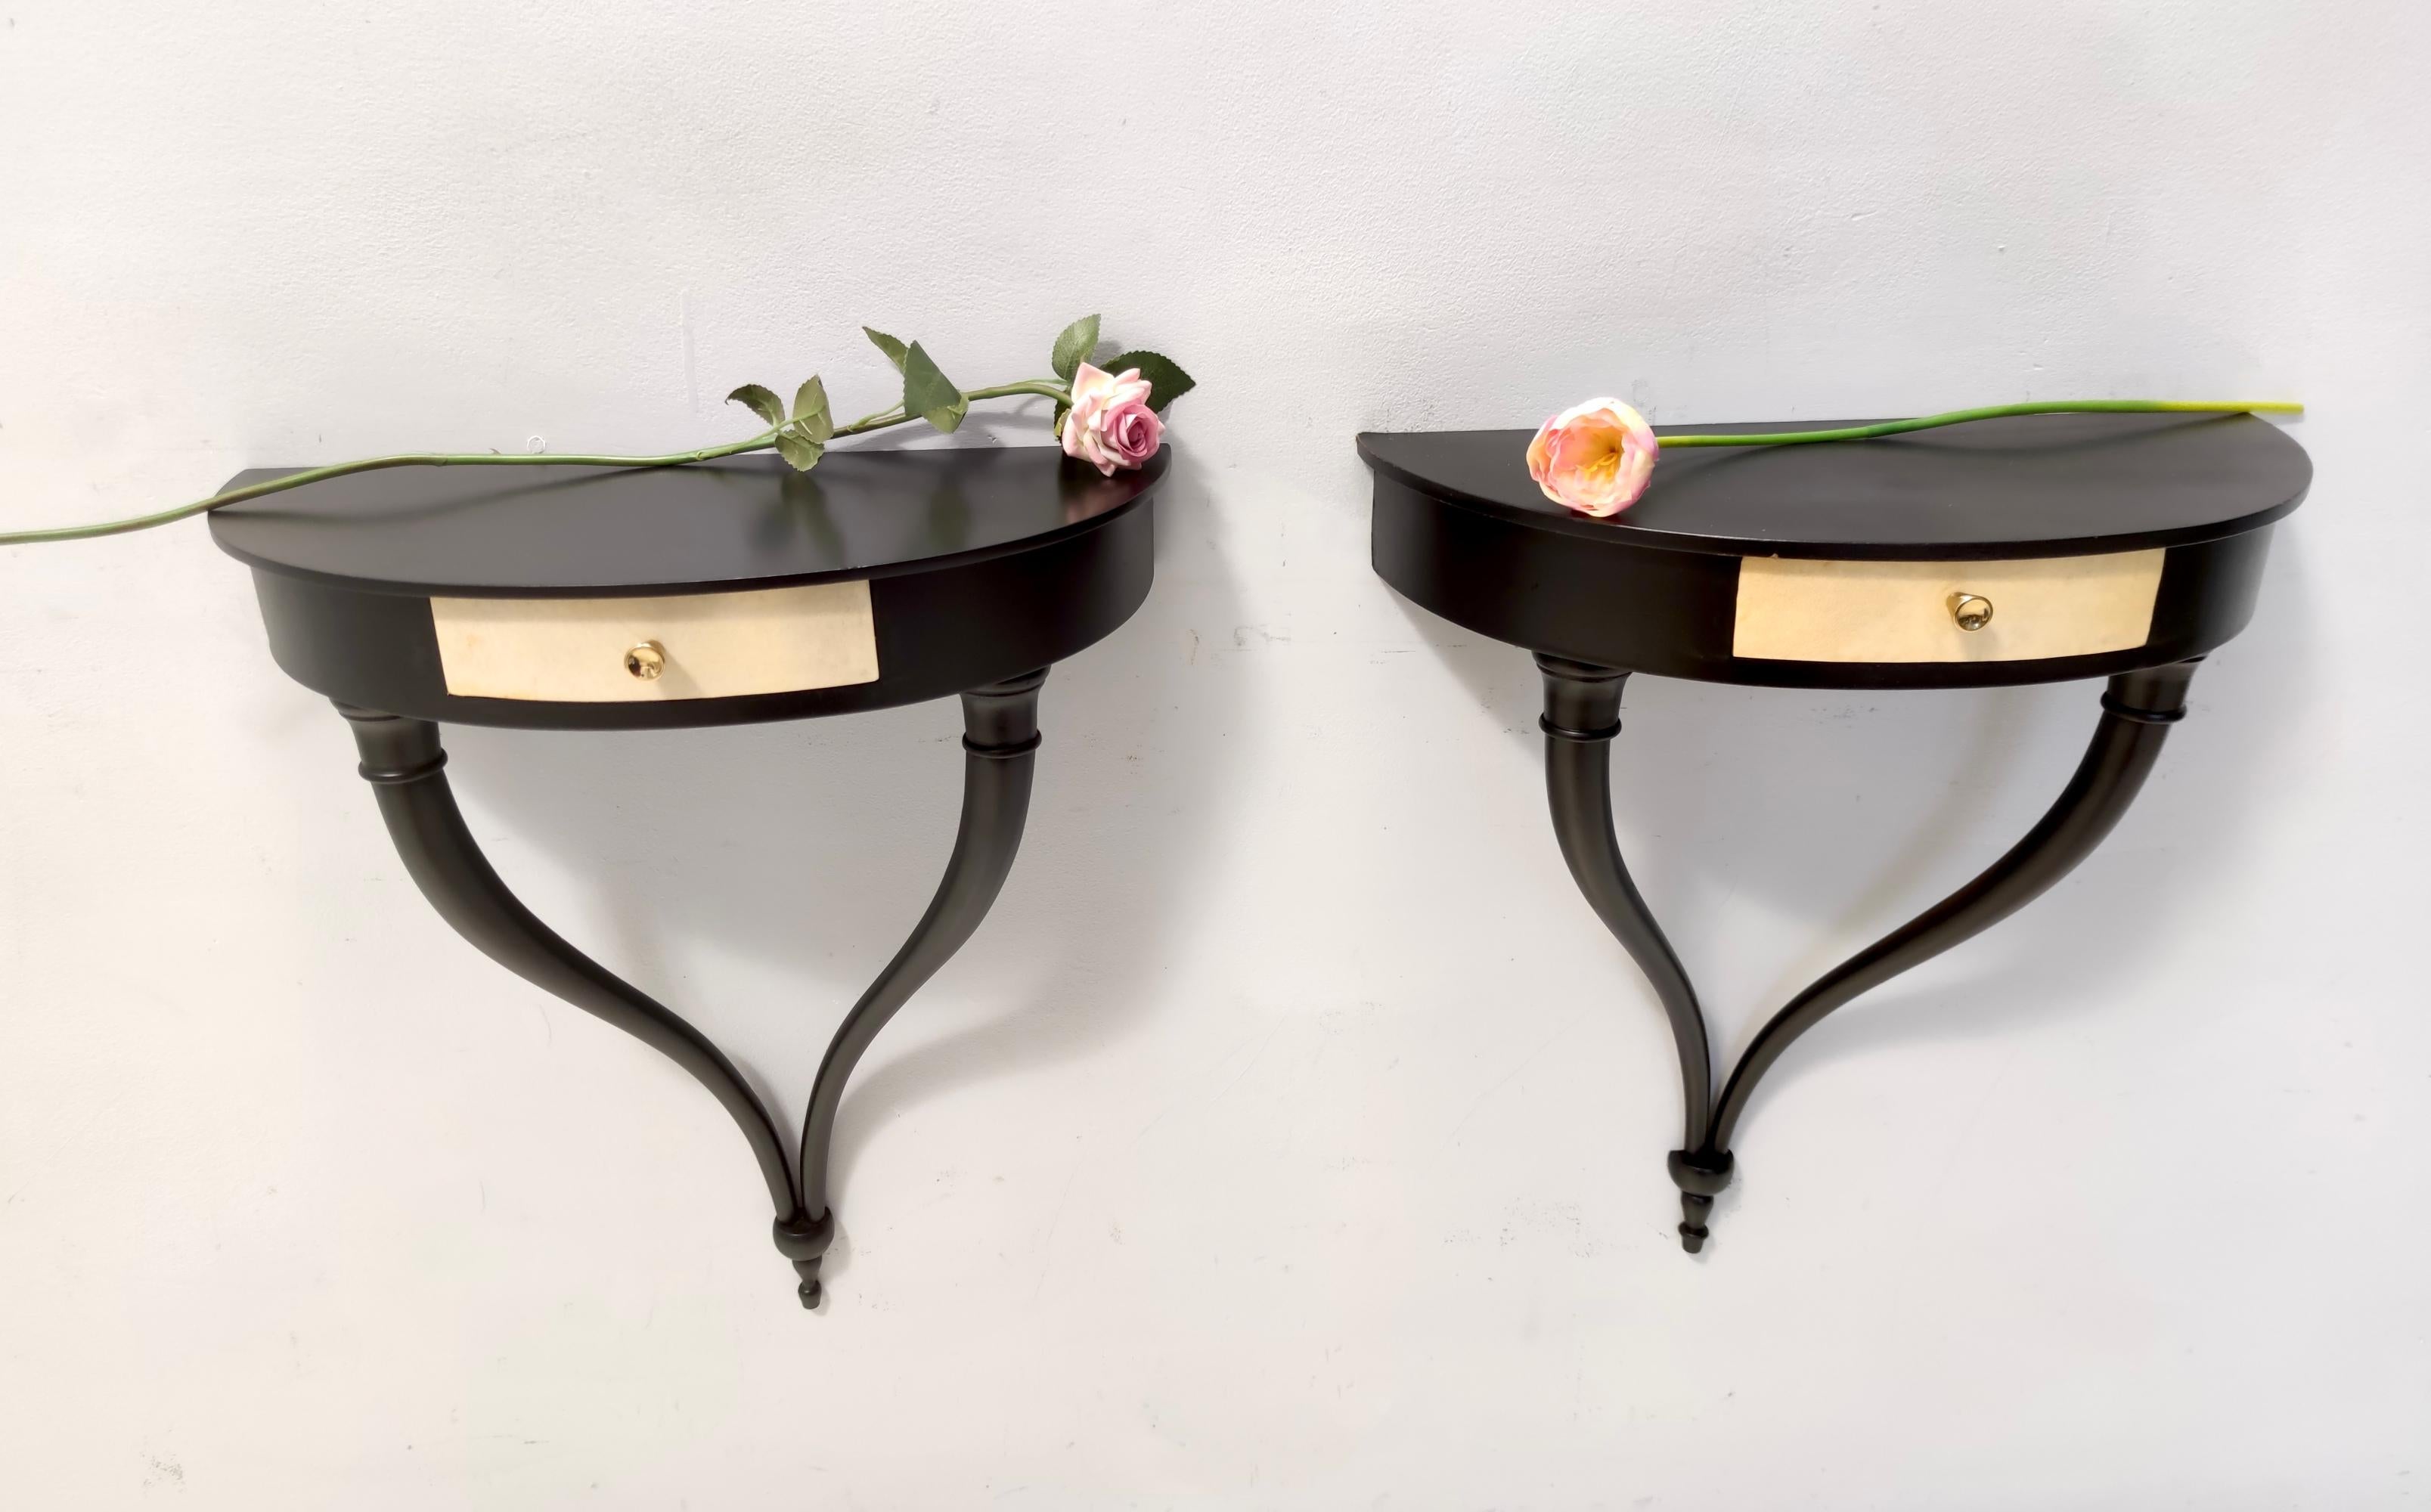 Made in Italy, 1940s.
These wall-mounted console tables / nightstands feature a black ebonized beech frame with brass handles and  parchment drawers.
Ulrich used this sinuous design also for wall lights and sconces. 
They might show slight traces of